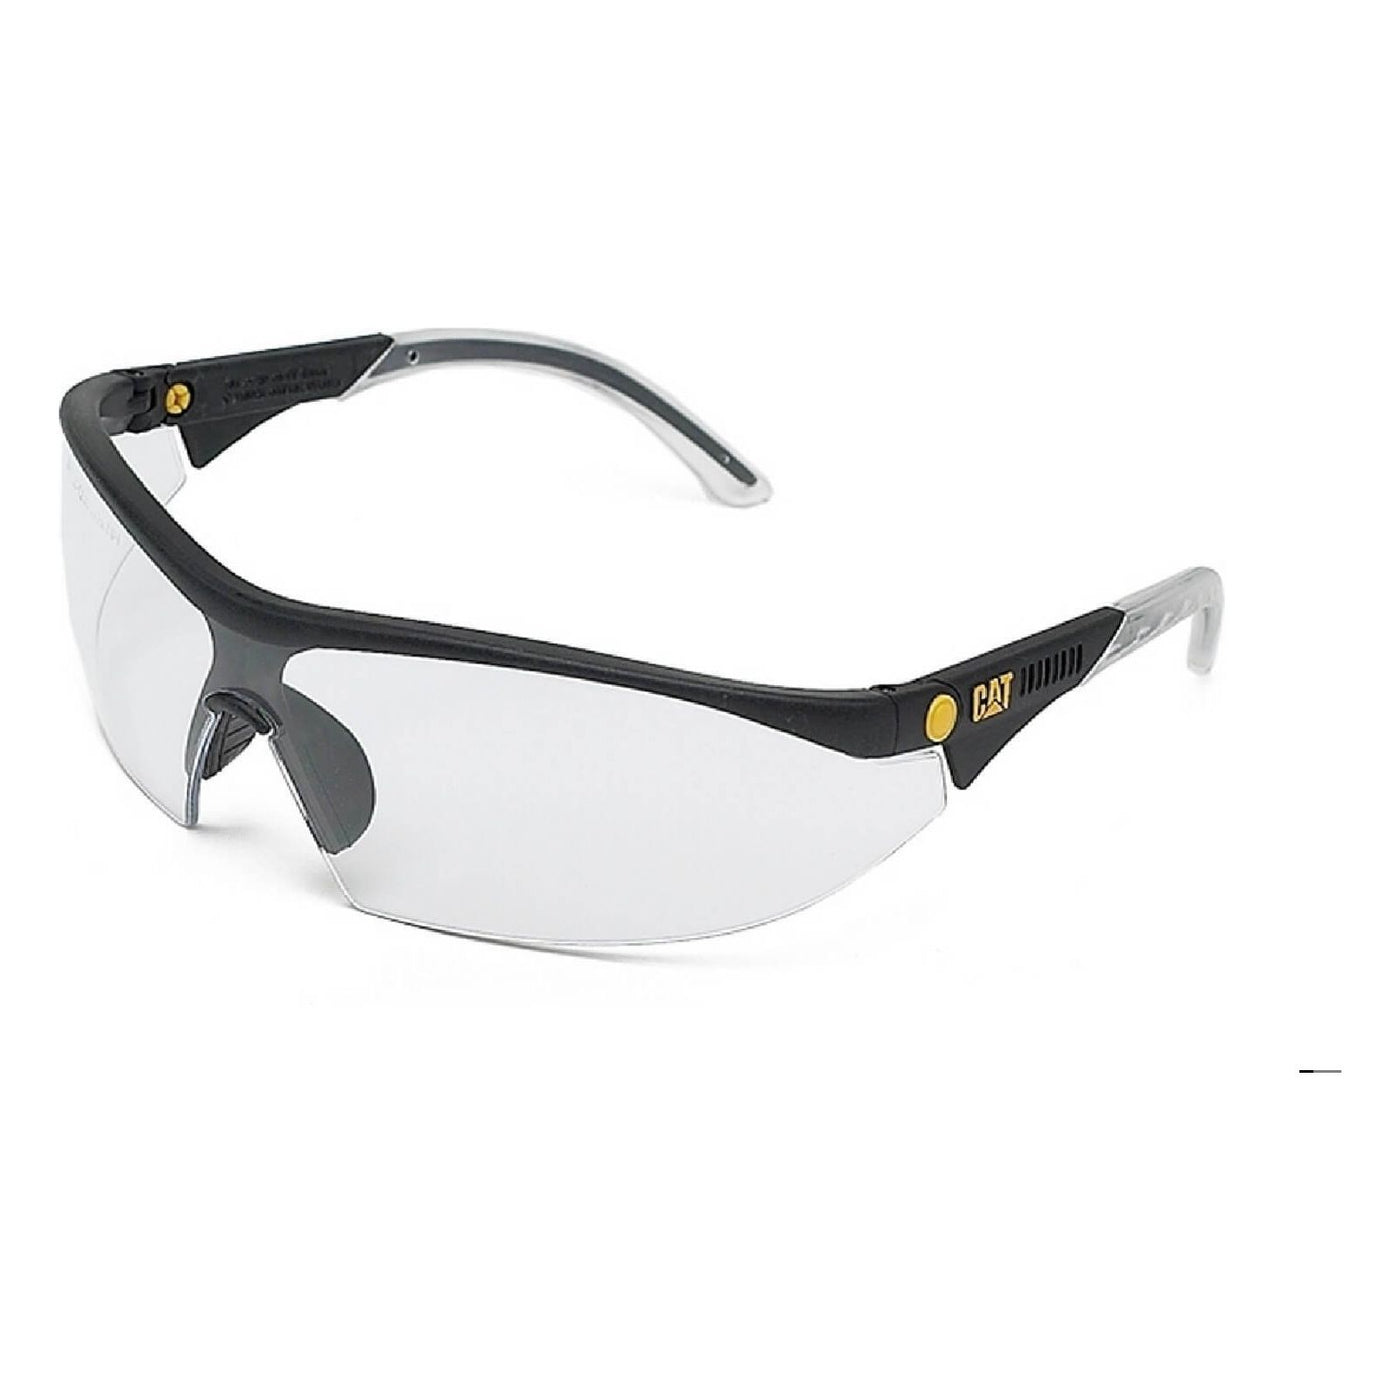 Caterpillar Digger Safety Glasses-Clear-Main